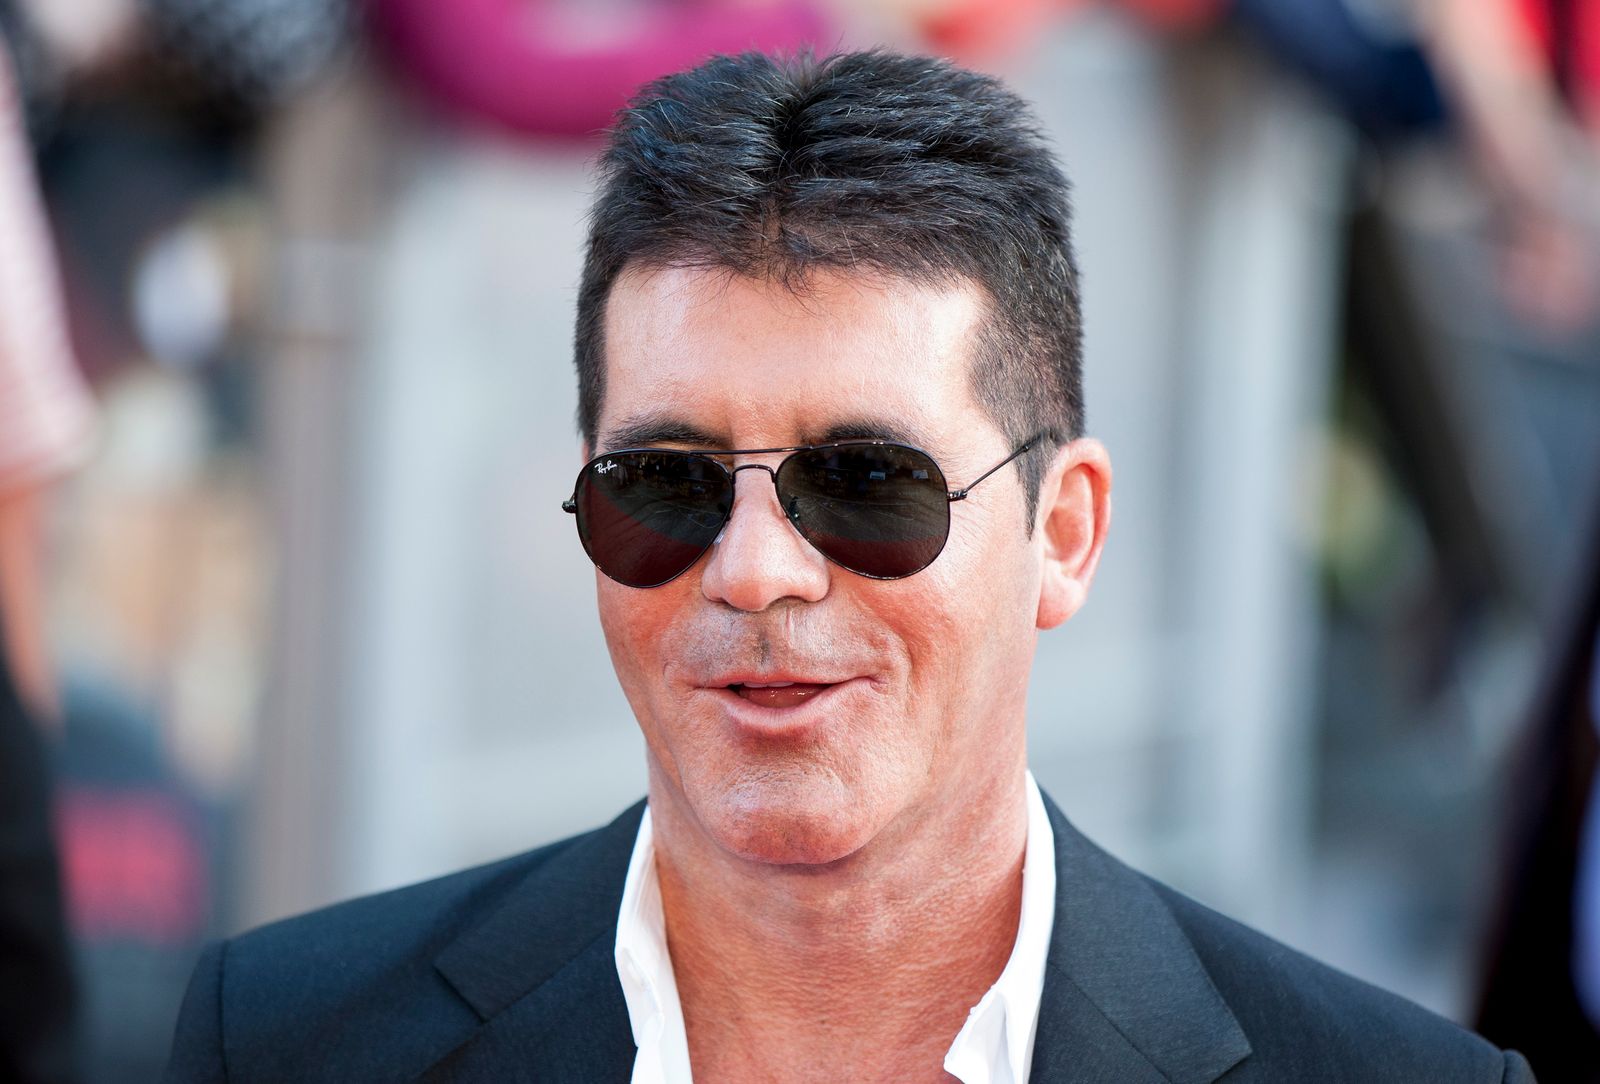 Entertainment producer Simon Cowell attend the 2013 world premiere of "One Direction" in London. | Photo: Getty Images